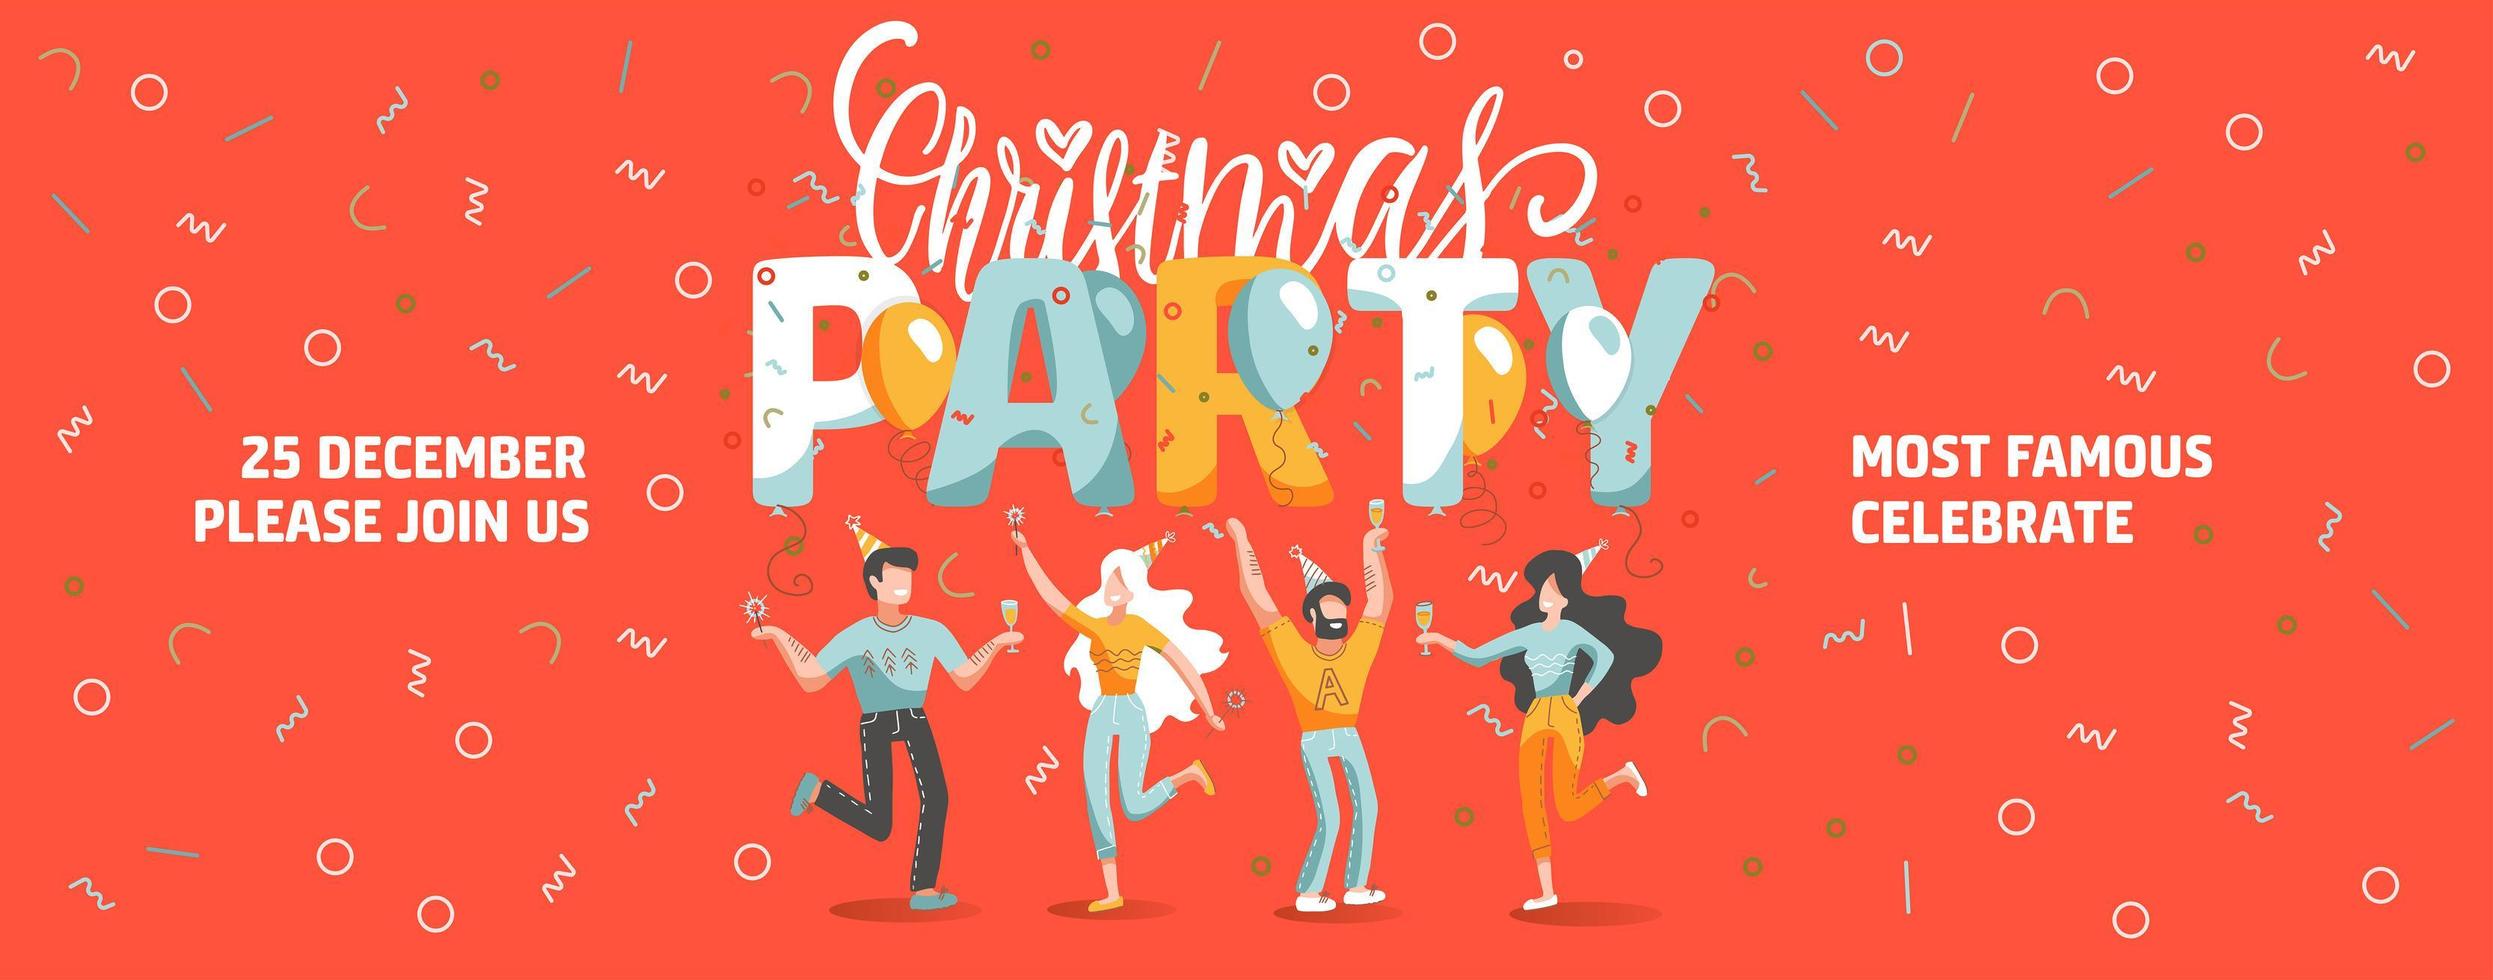 Vector invitation ticket template to Christmas party with funny people dancing and drinking wine. New Year banner with lettering text.